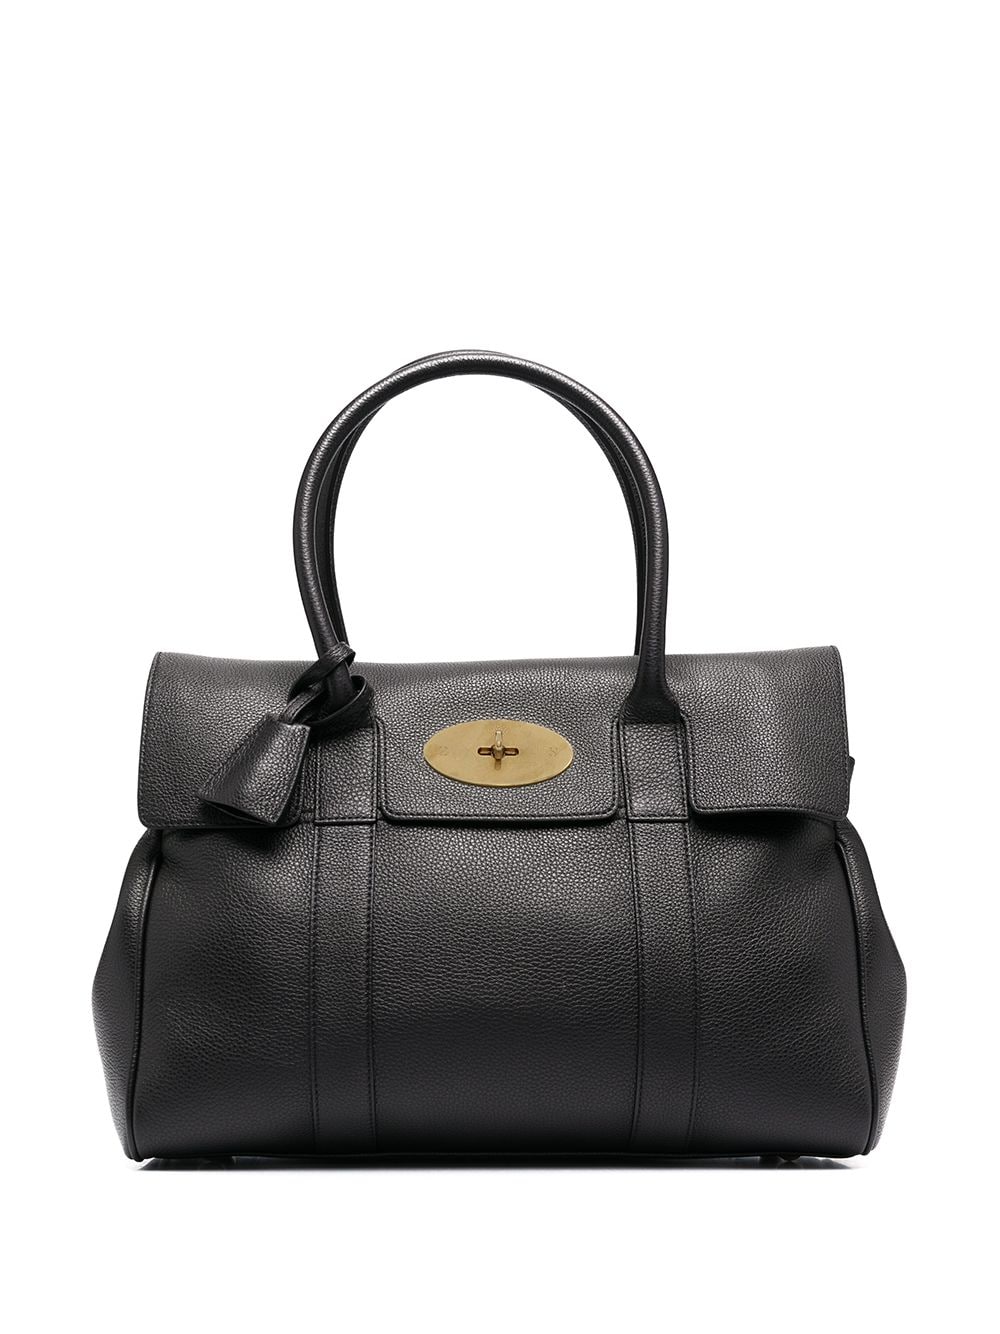 Mulberry Bayswater front-flap closure tote bag - Black von Mulberry